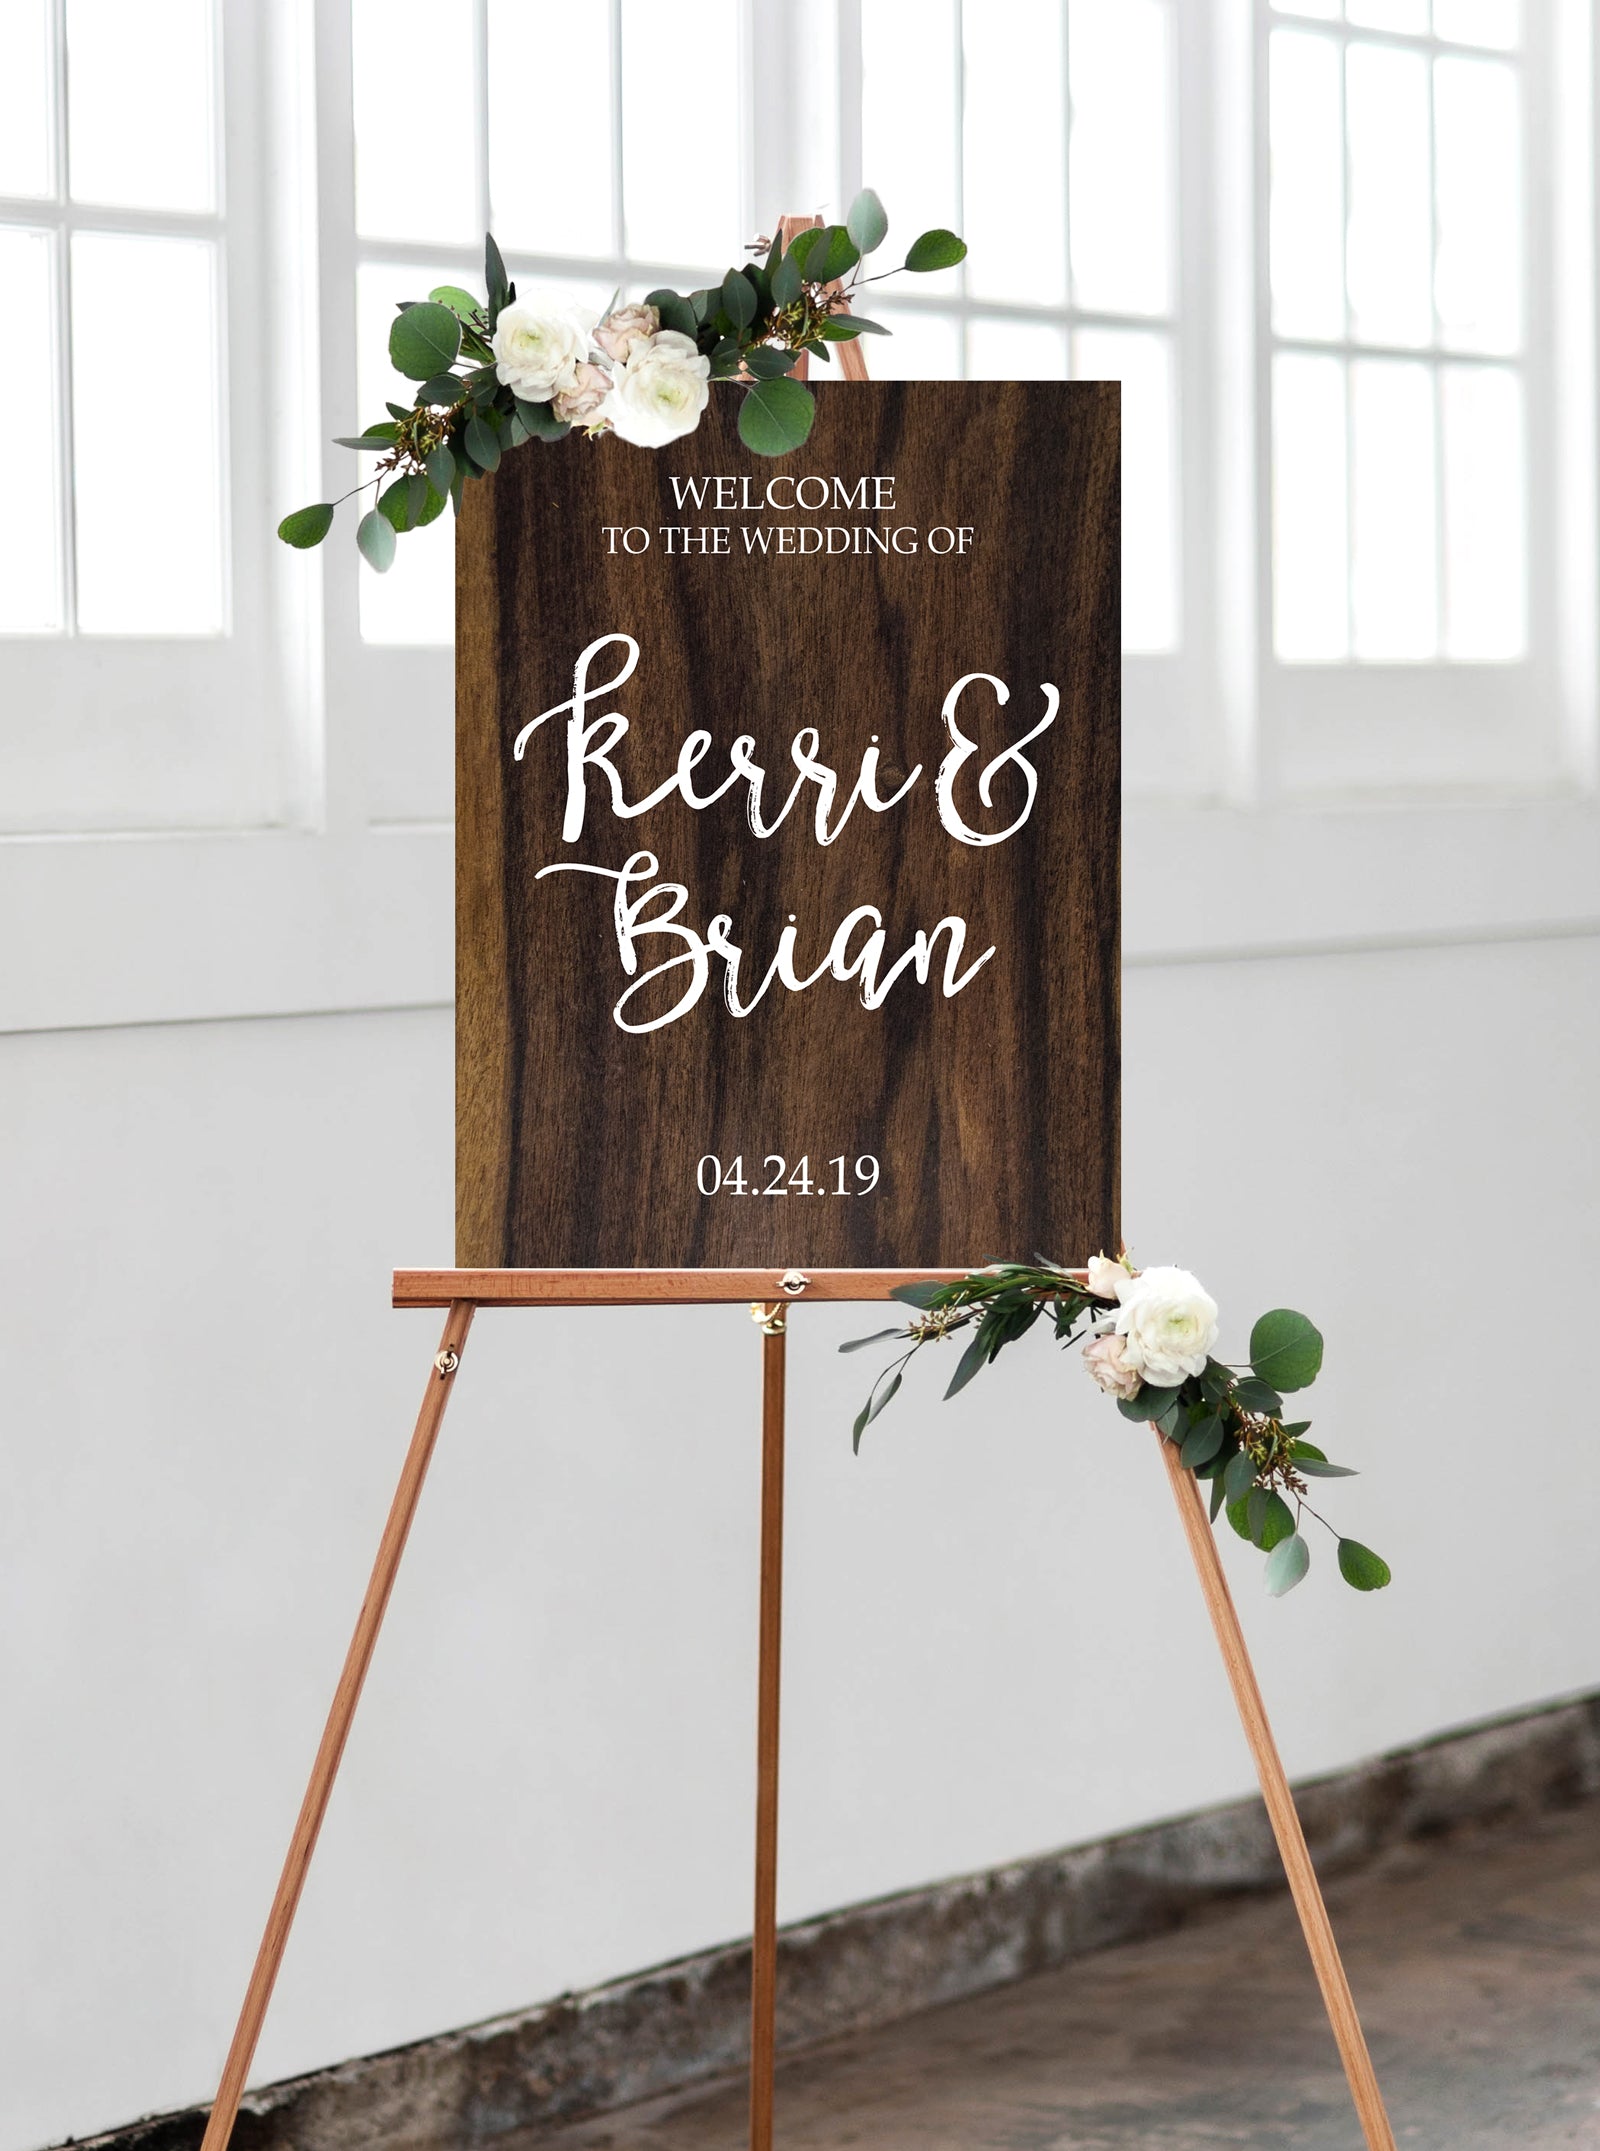 Personalized Calligraphy Wedding Welcome Sign - Wedding Decor Gifts